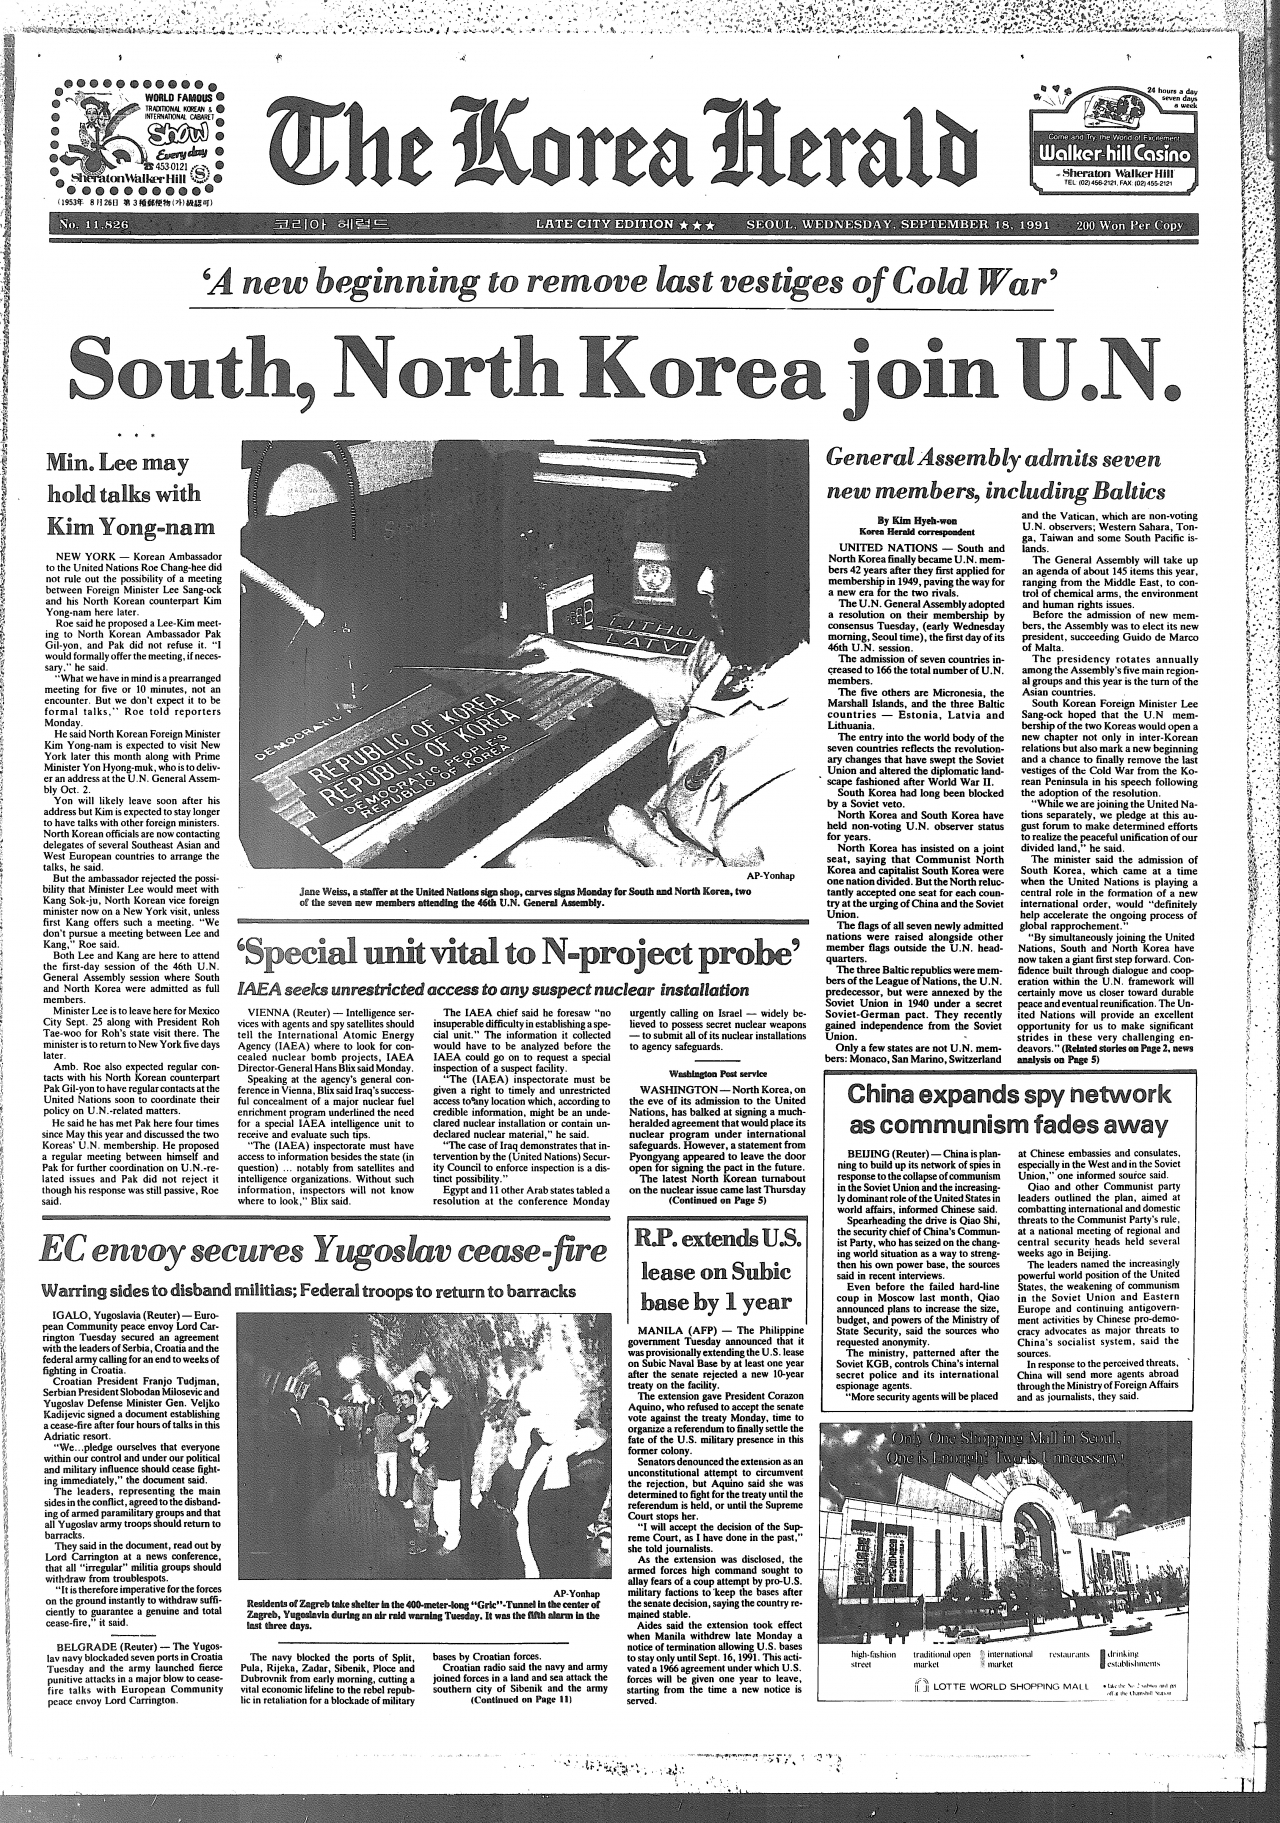 The front page of the Sept. 18, 1991, edition of The Korea Herald celebrates the two Koreas' admission to the United Nations. (The Korea Herald)